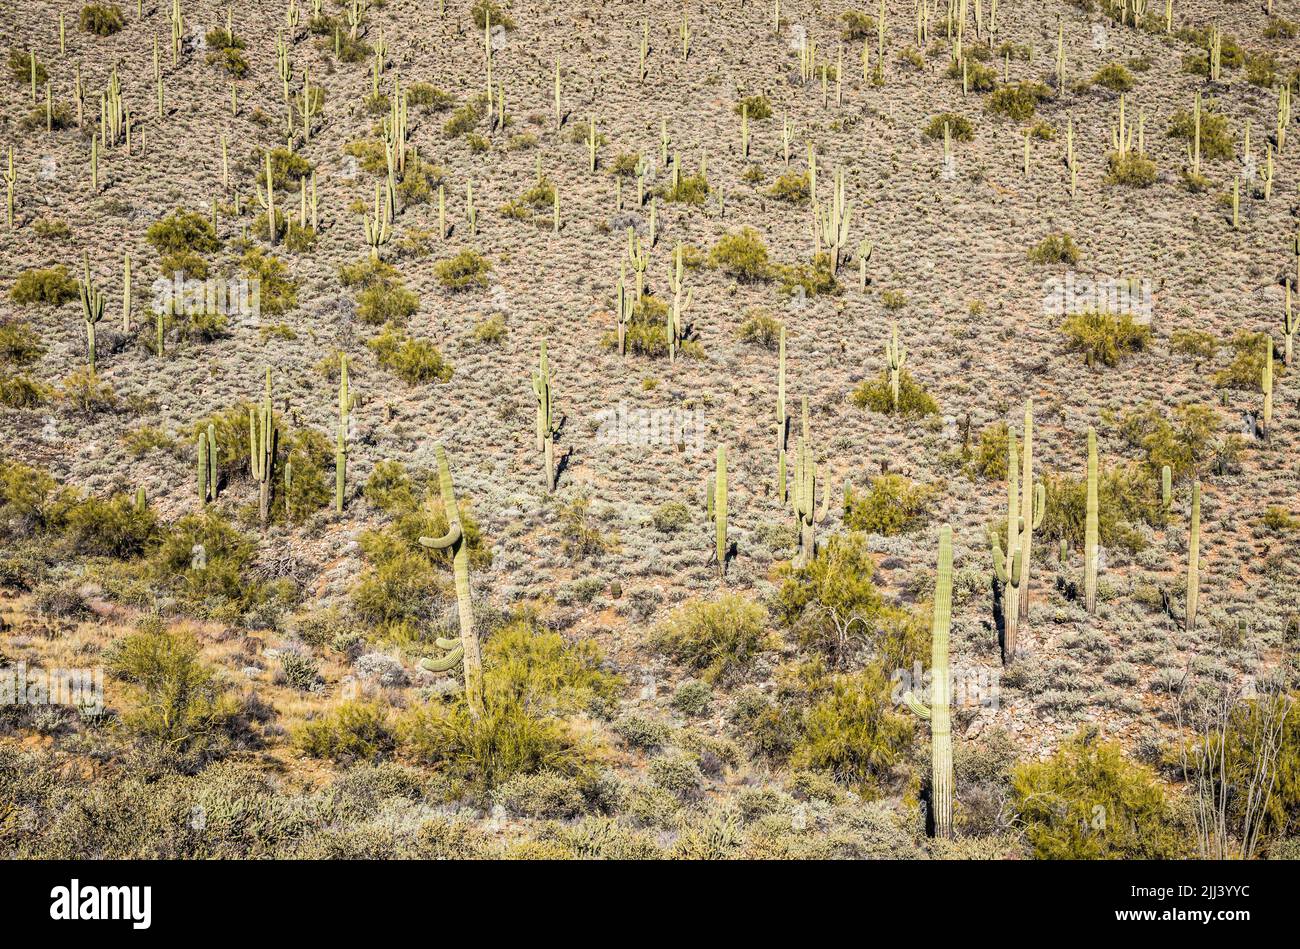 A hillside of Saguaro cactus and other desert plants along the Go John trail in the Cave Creek Regional Park. Stock Photo